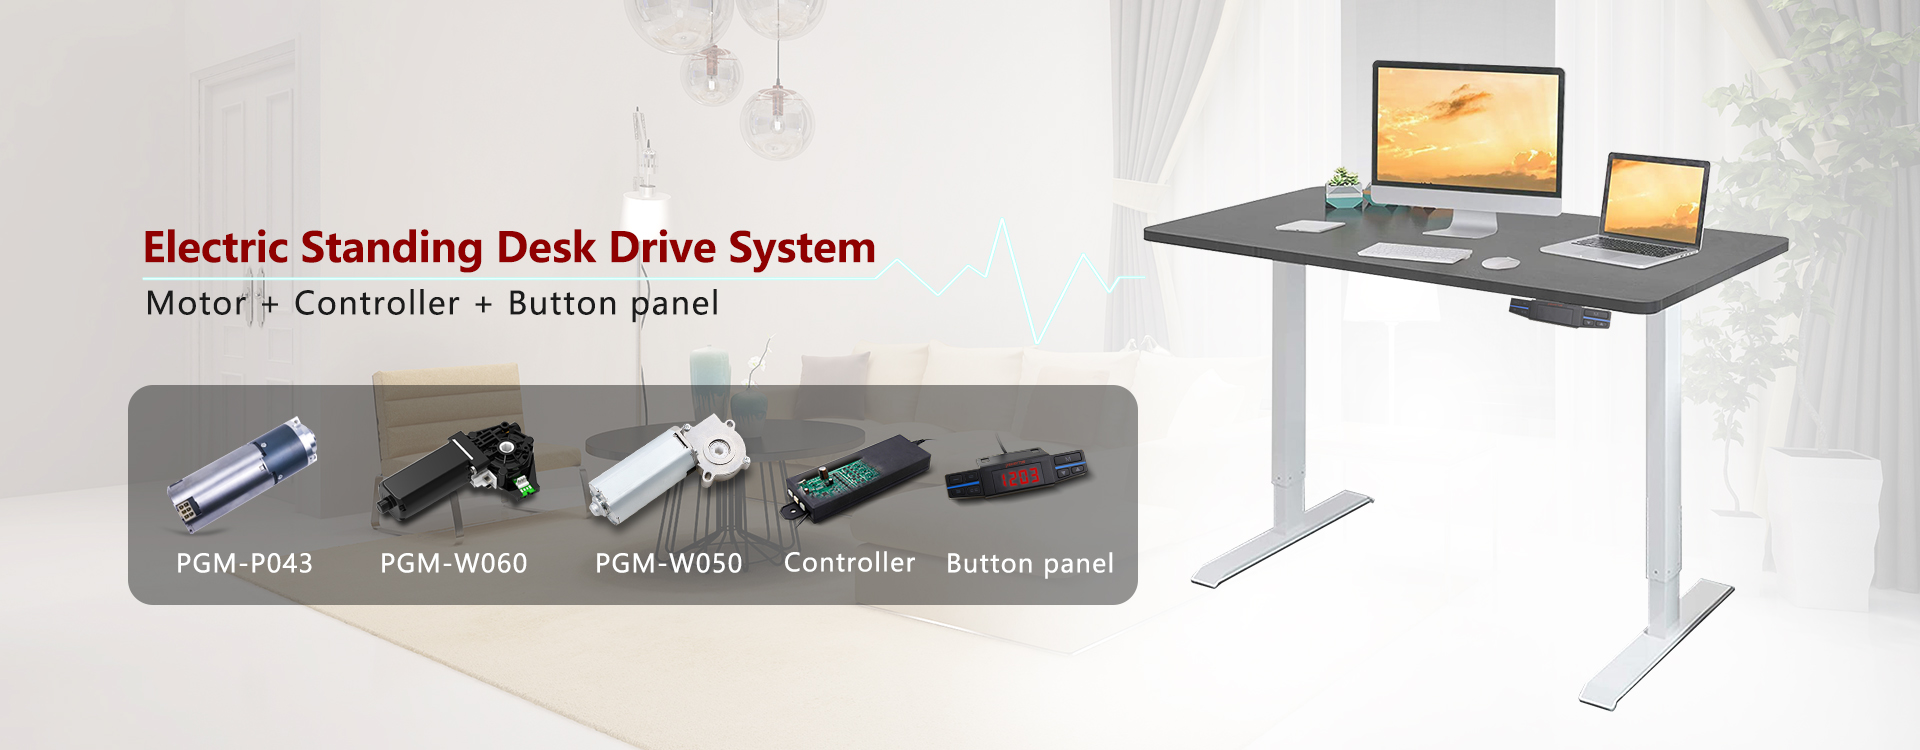 Electric Standing Desk Drive System